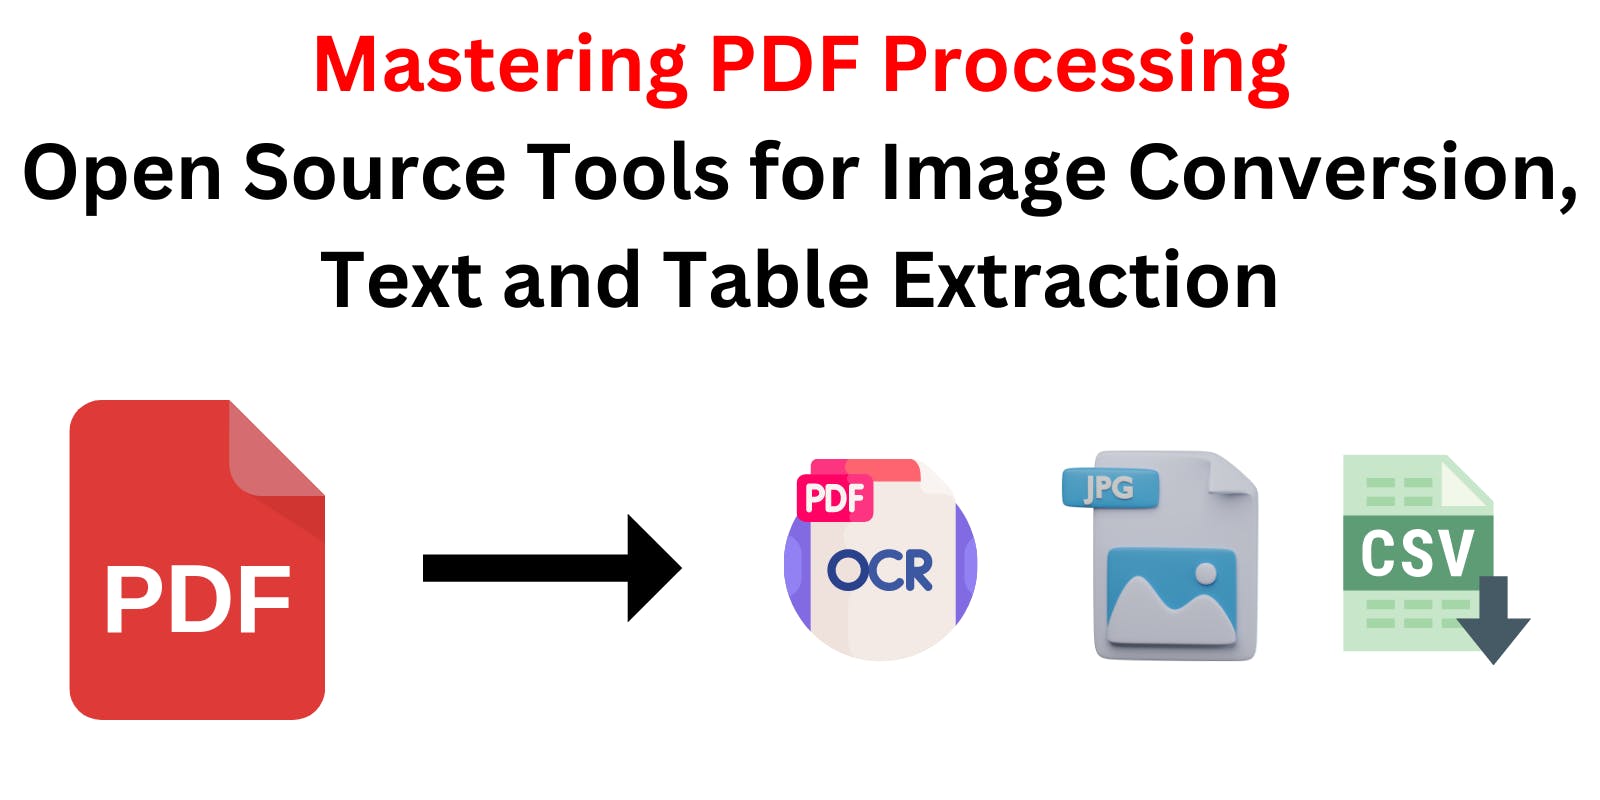 PDF Processing: Open Source Tools for PDF to Image Conversion, Text and Table Extraction